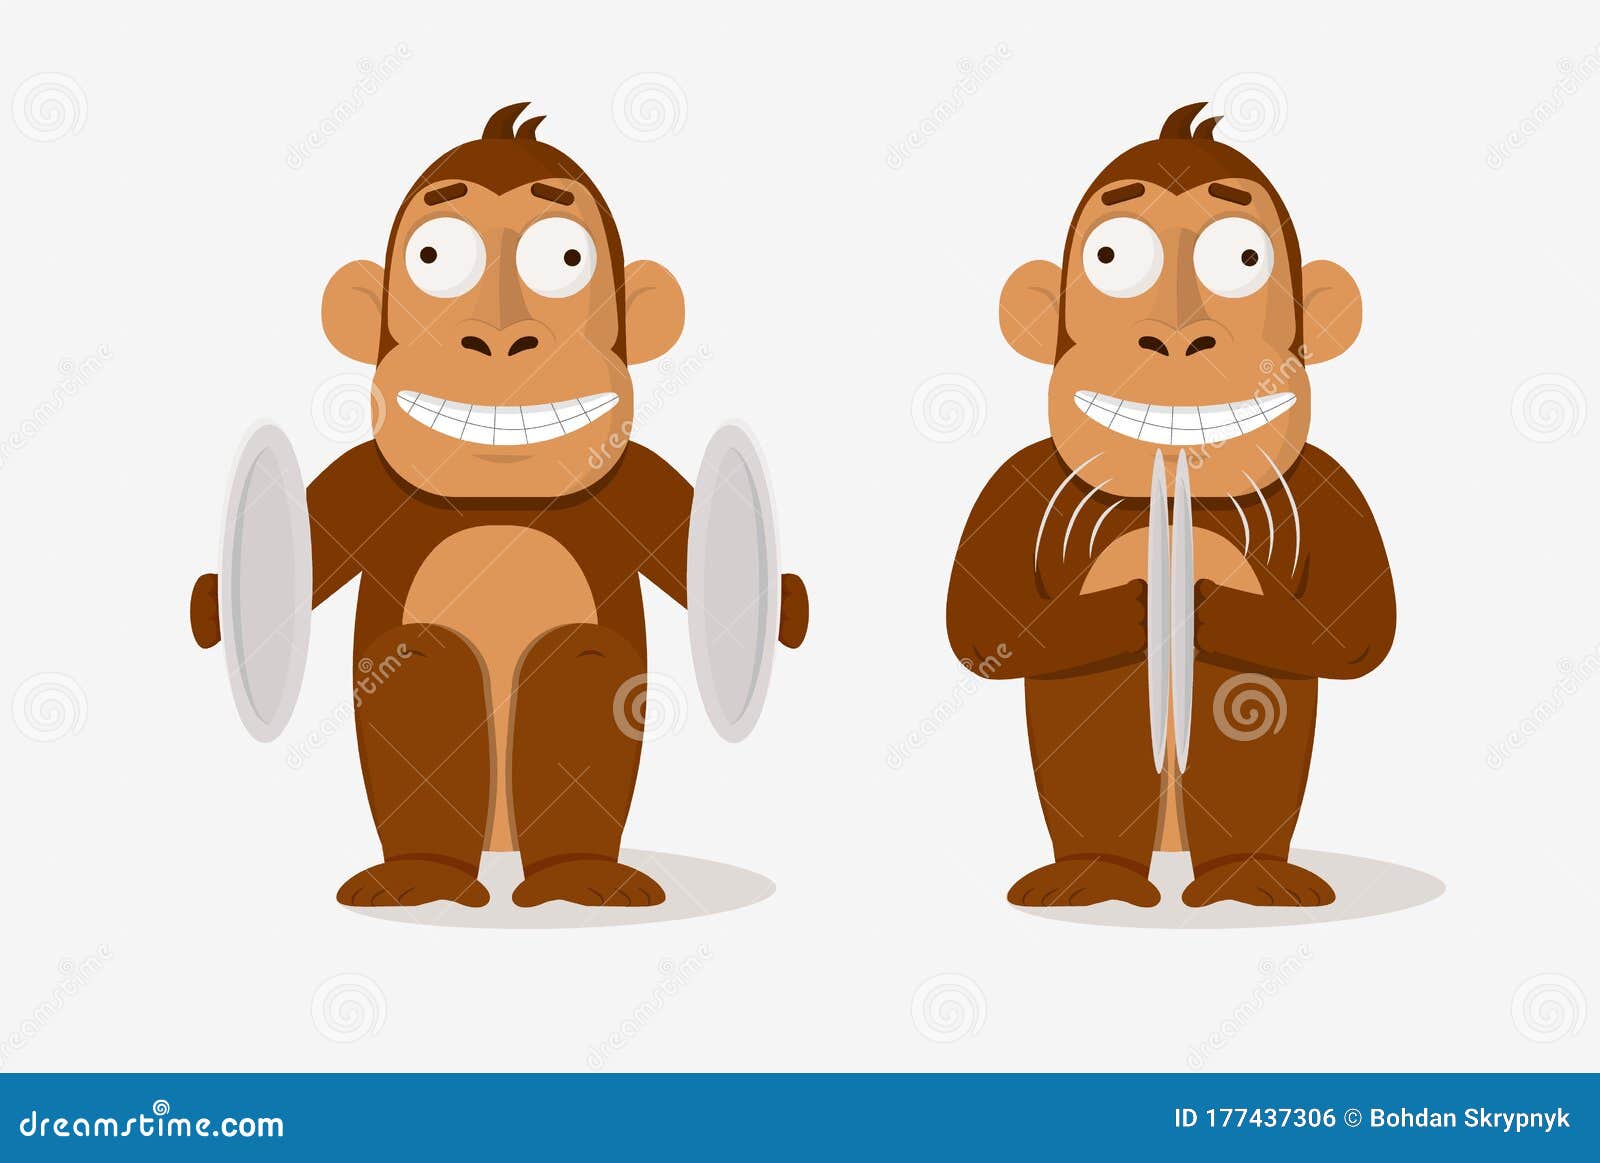 Two Cartoon Crazy Smile Monkey Playing Banding Cymbals Vector Graphic  Illustration Stock Vector - Illustration of creature, funny: 177437306